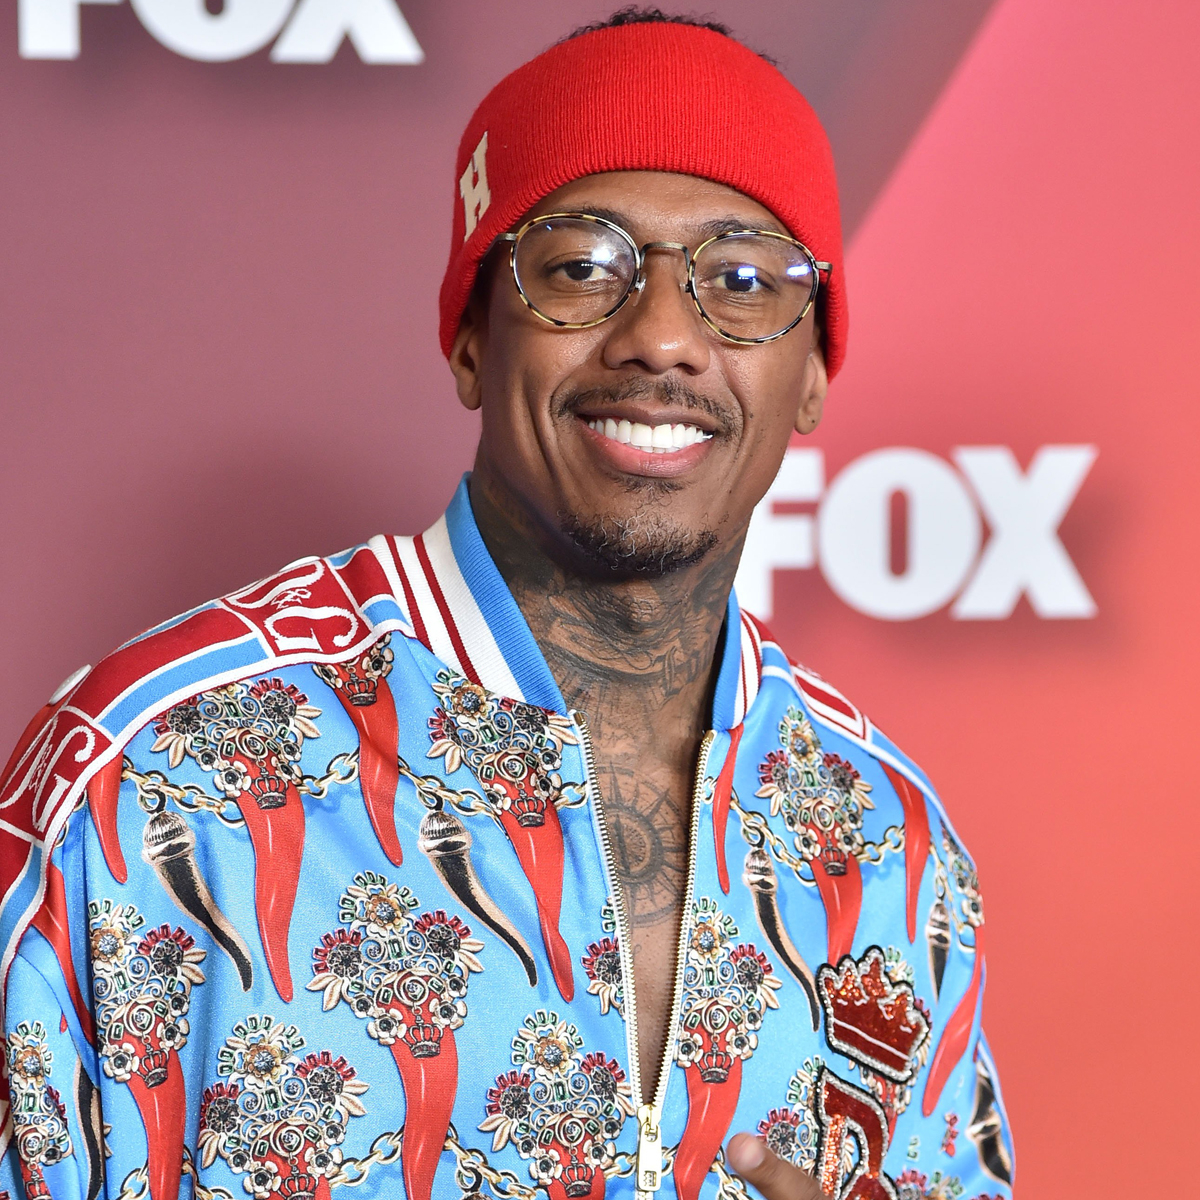 Why Nick Cannon Thought There Was “No Way” He’d Have 12 Kids